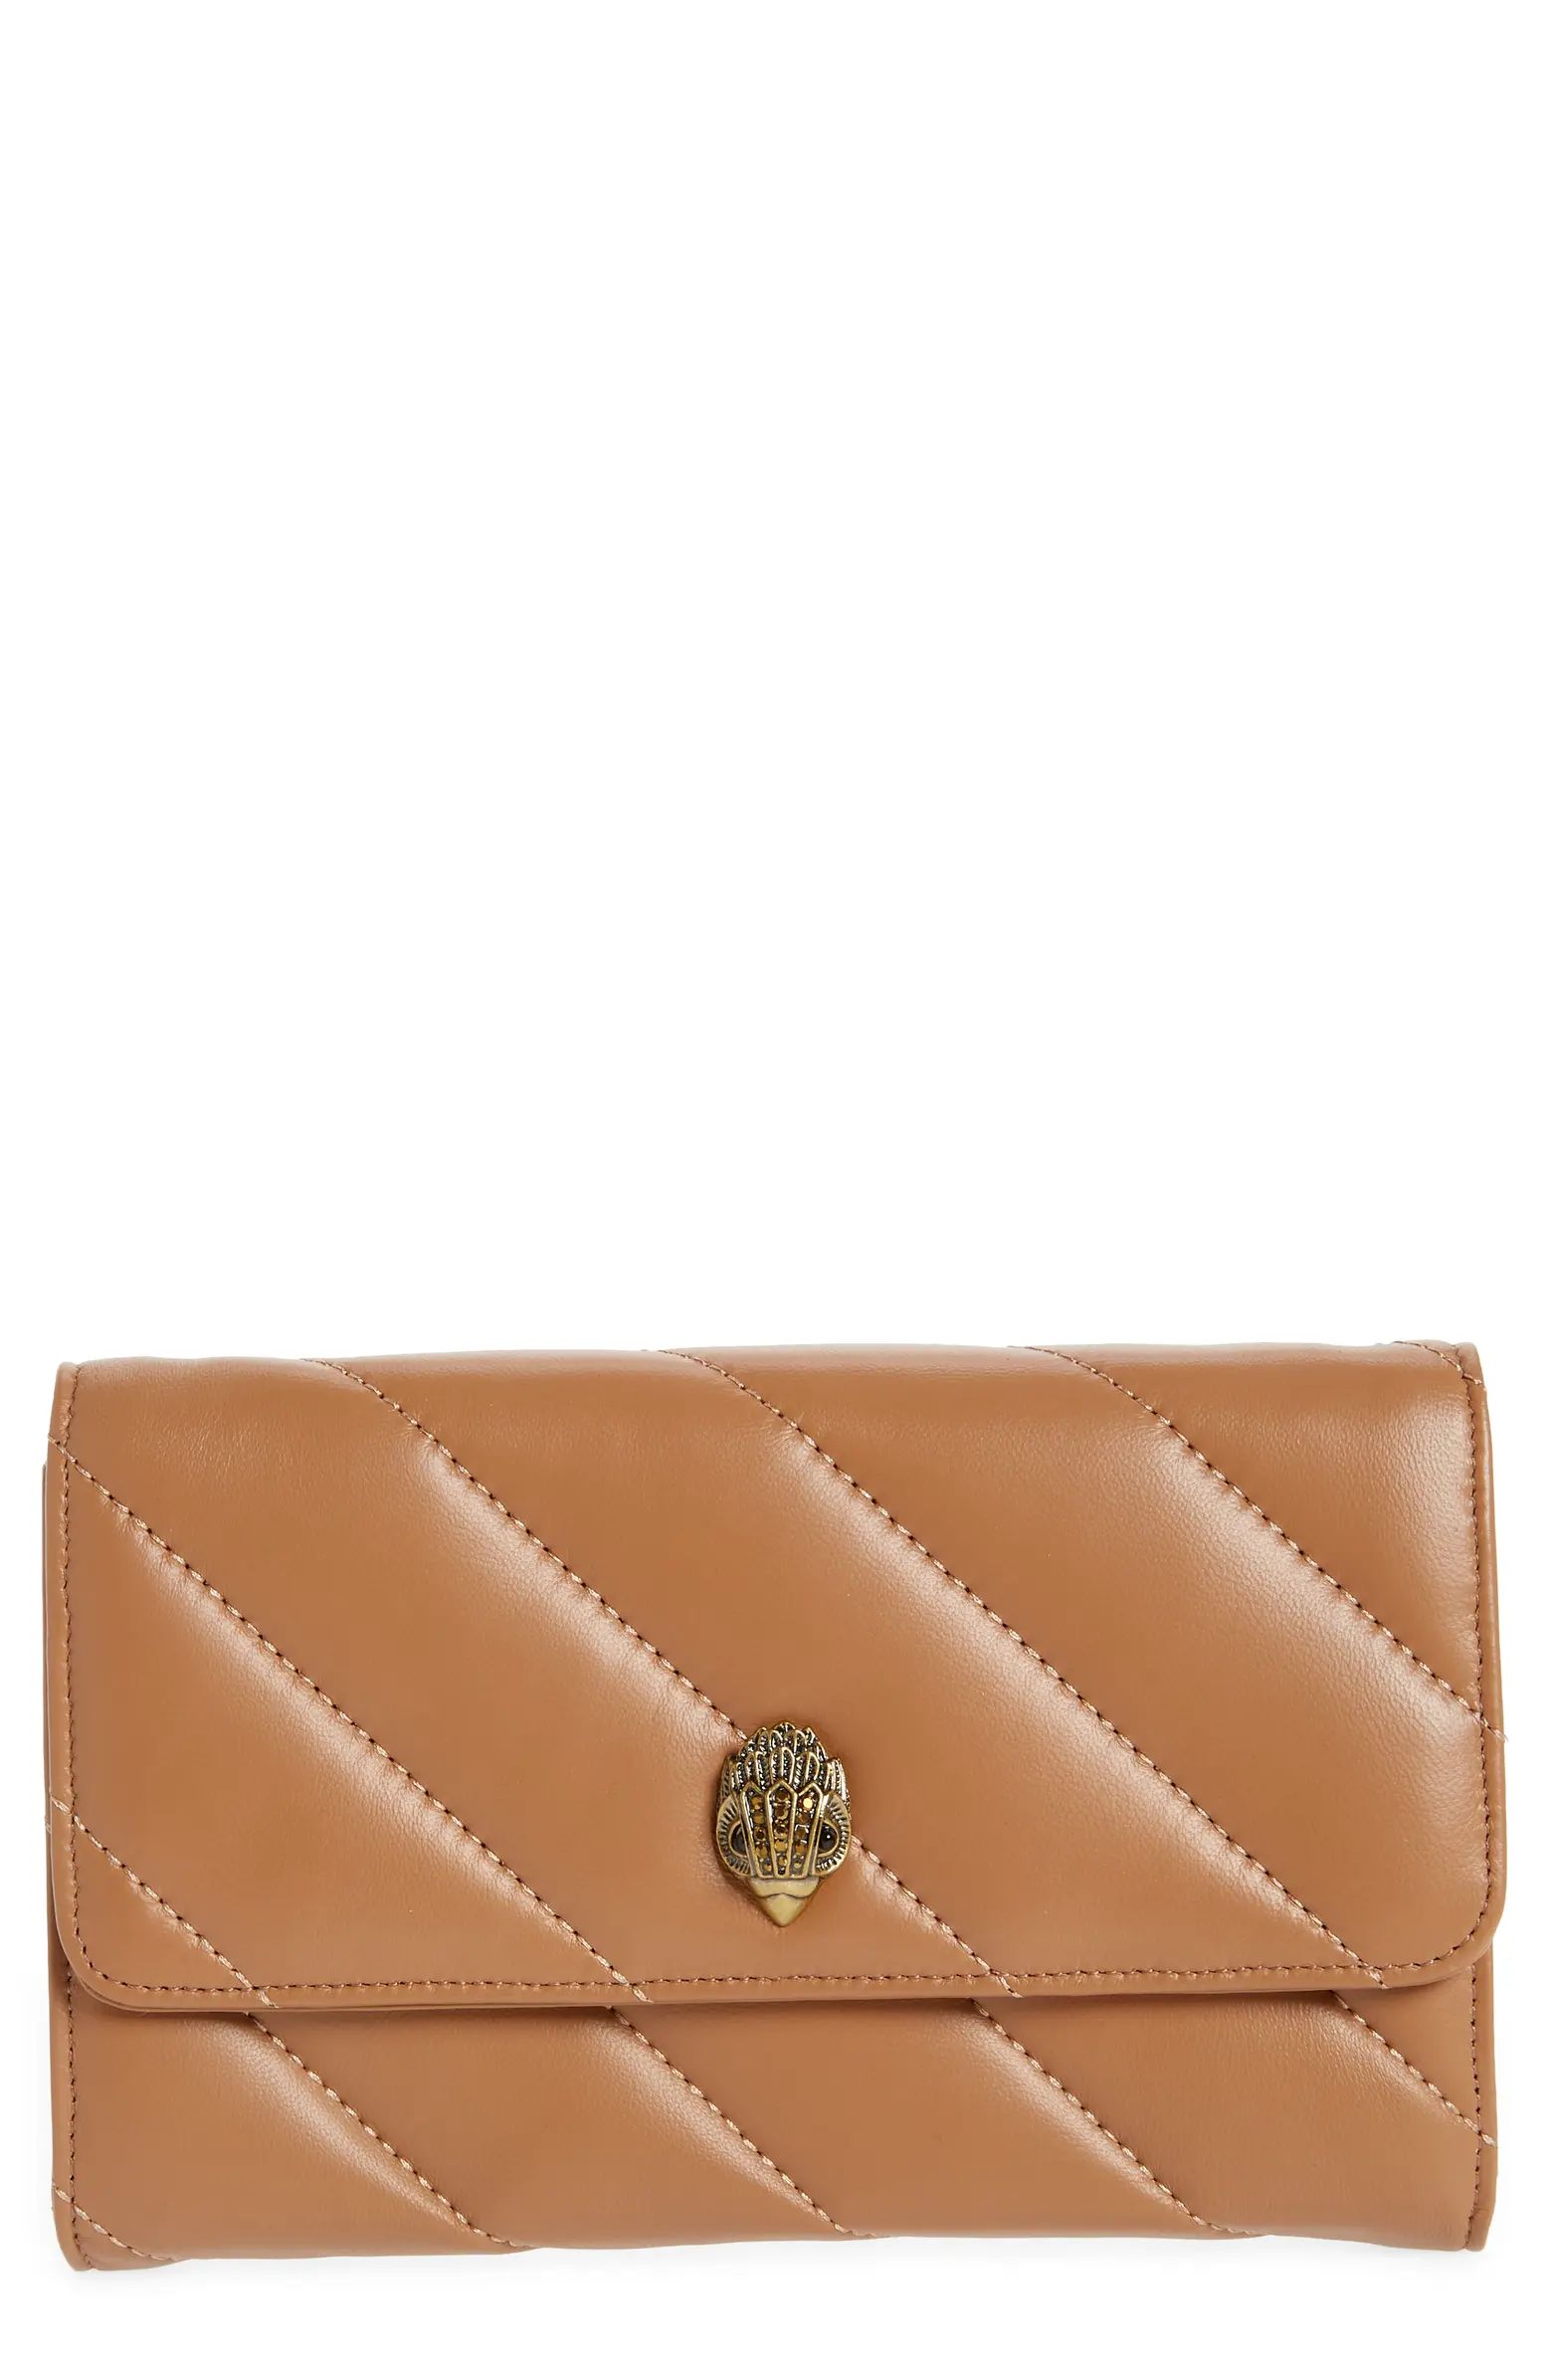 Kurt Geiger London Soho Drench Leather Wallet on a Chain | Nordstrom | Nordstrom